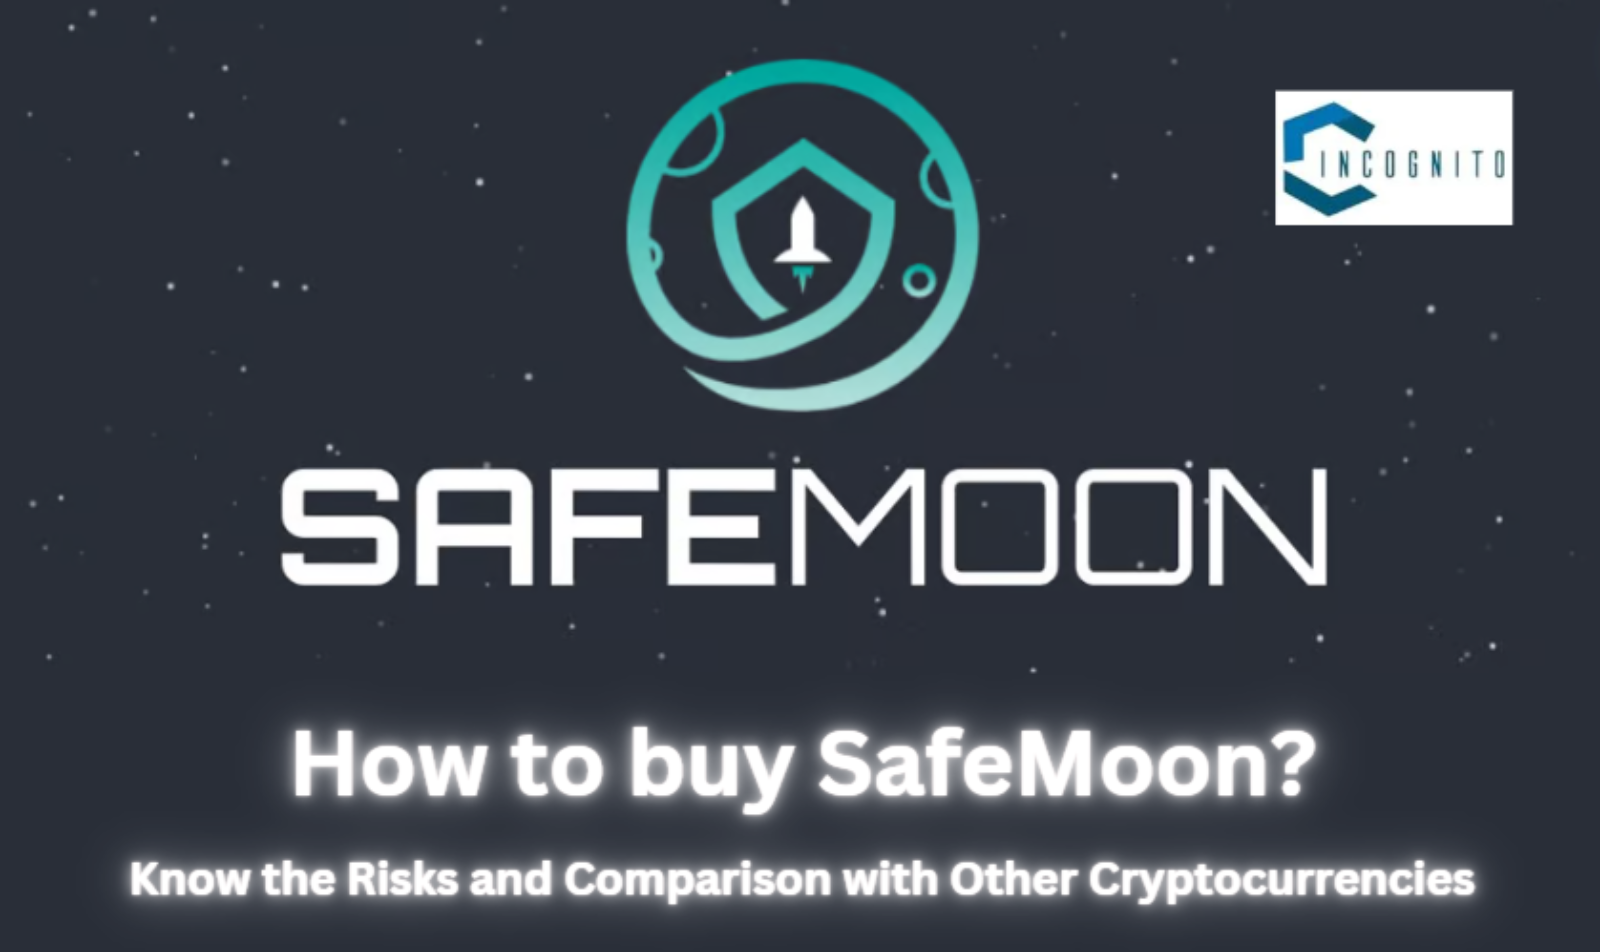 How to buy SafeMoon? Know the Risks and Comparison with Other Cryptocurrencies